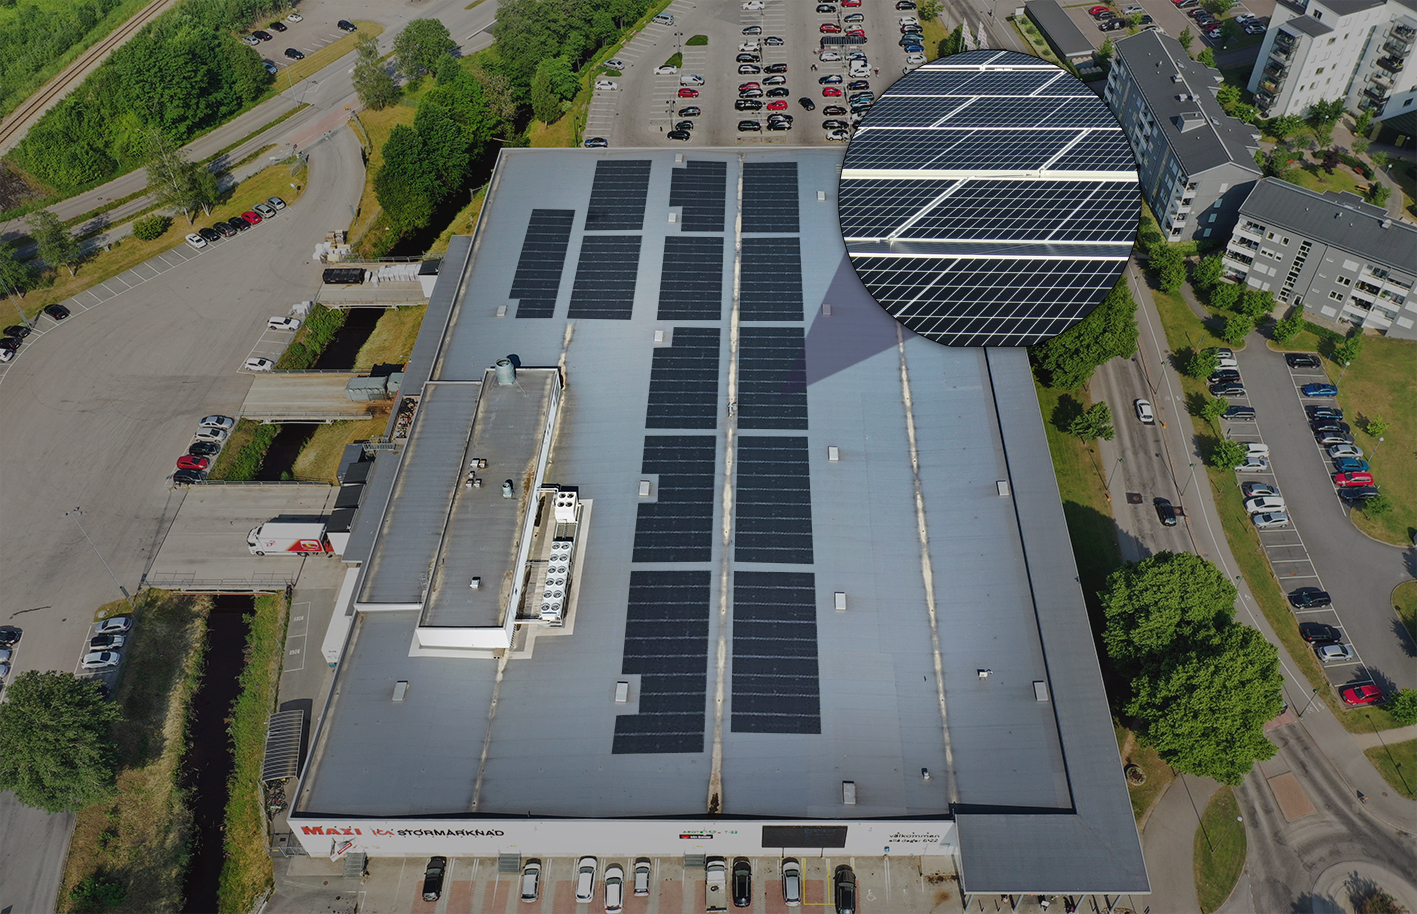 Soltech installs 4,000 sqm solar energy on a retail property in Borås